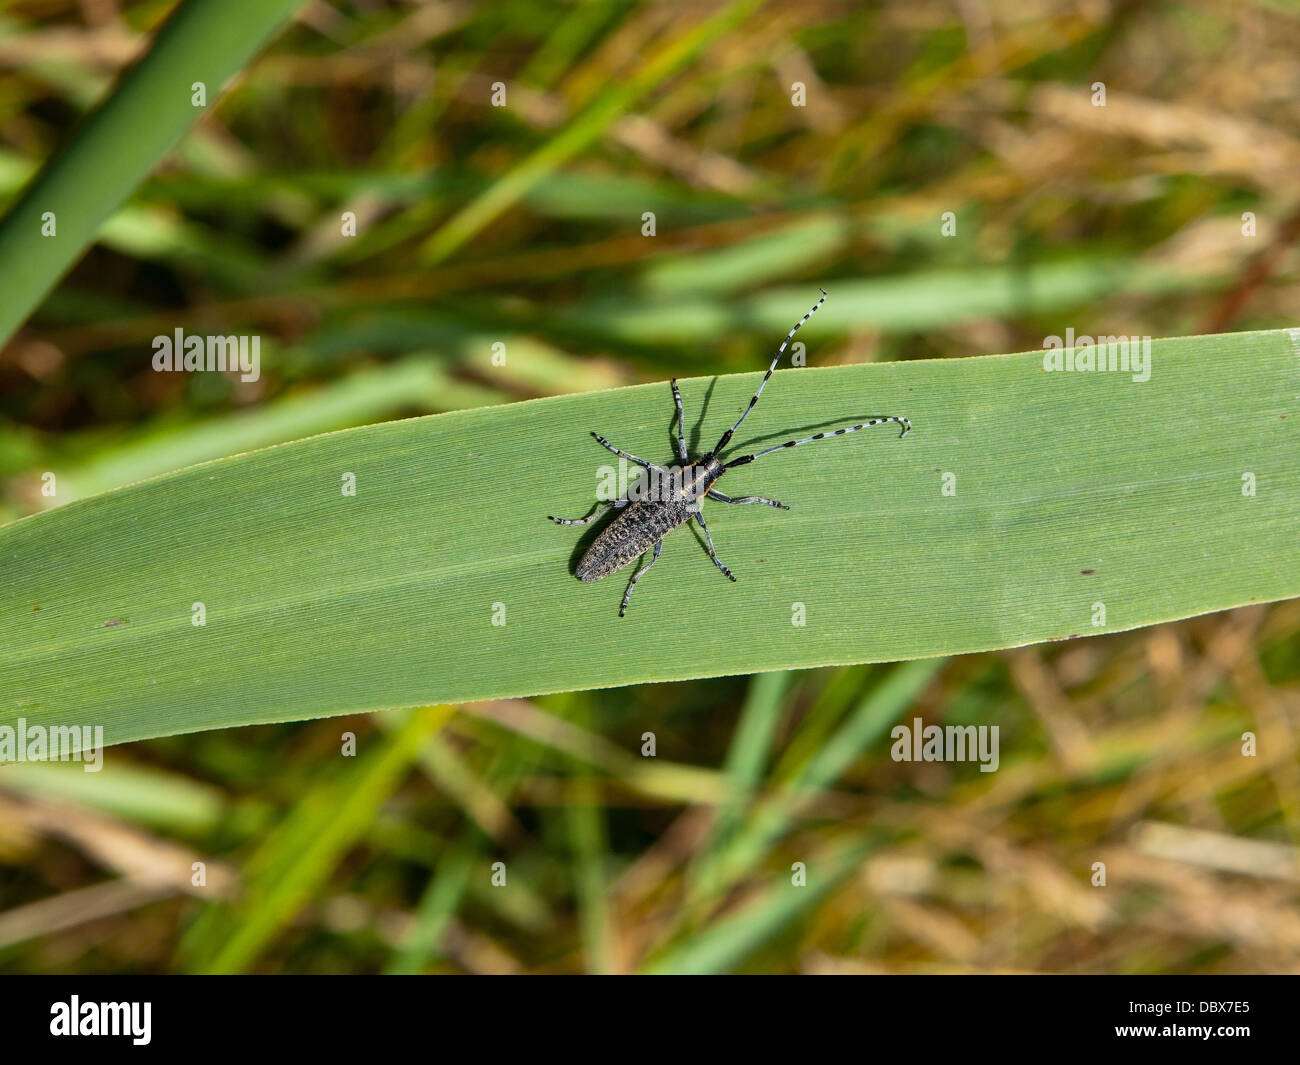 A long horn beetle with the Latin name of Agapanthea villosovirdescens resting on a green reed leaf, Stock Photo